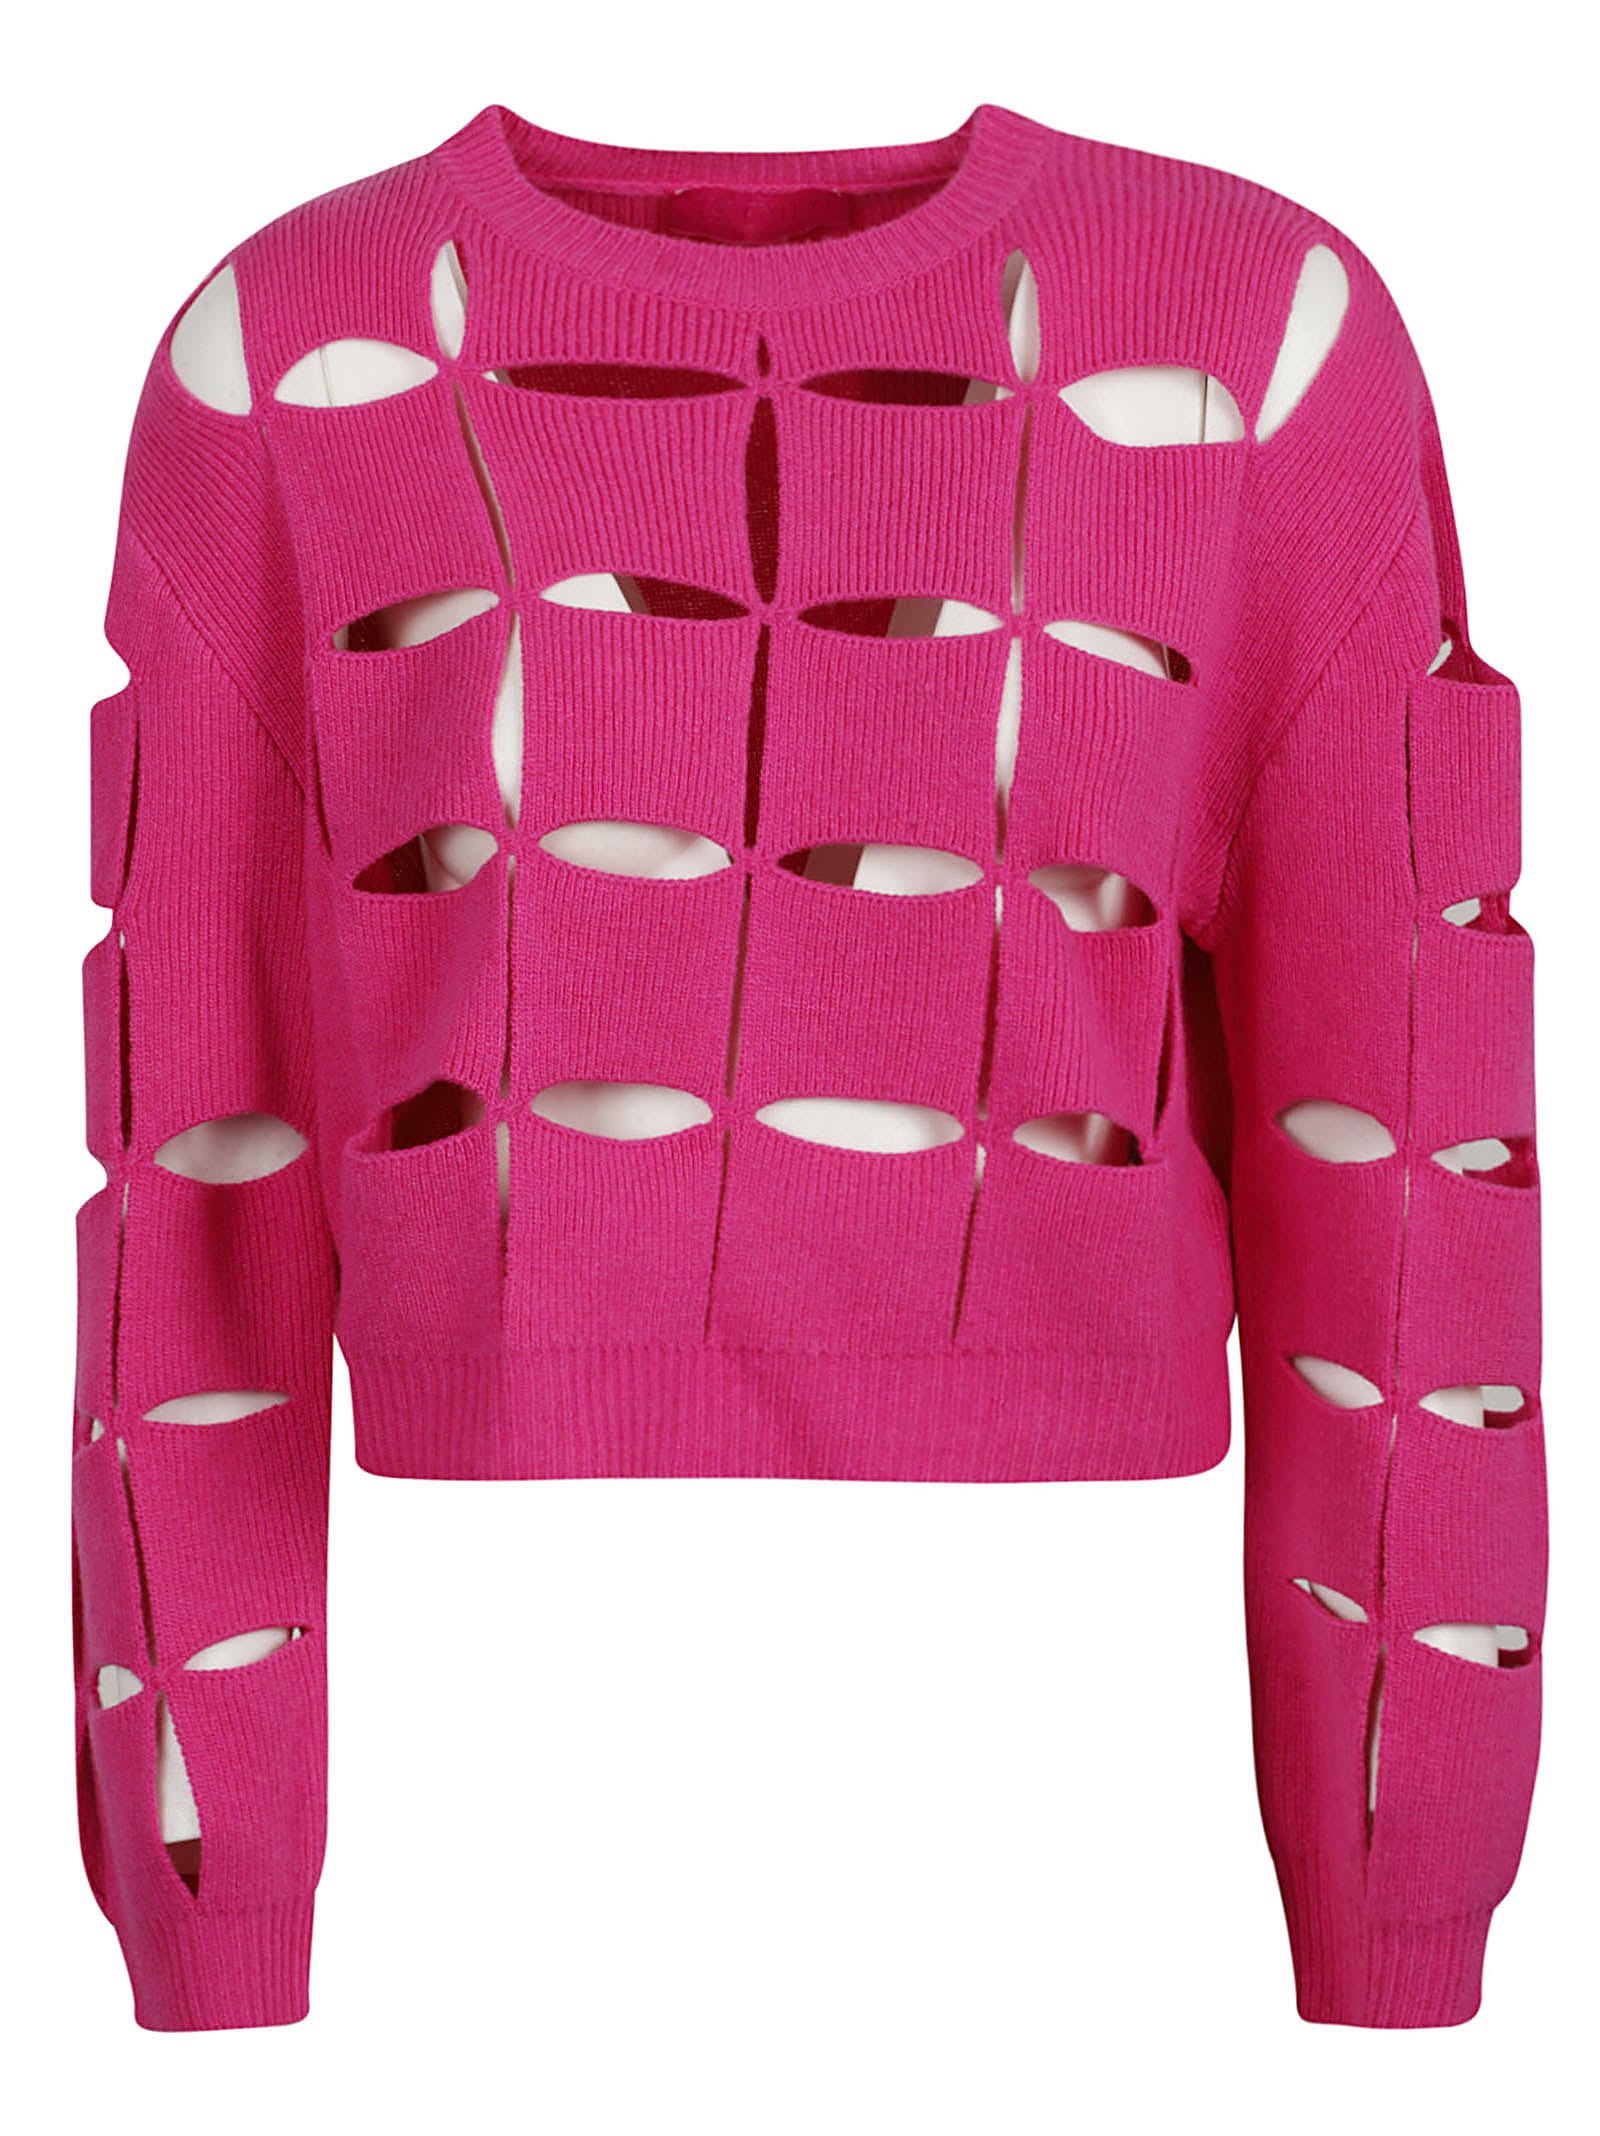 VALENTINO CUT-OUT DETAIL CROPPED SWEATER